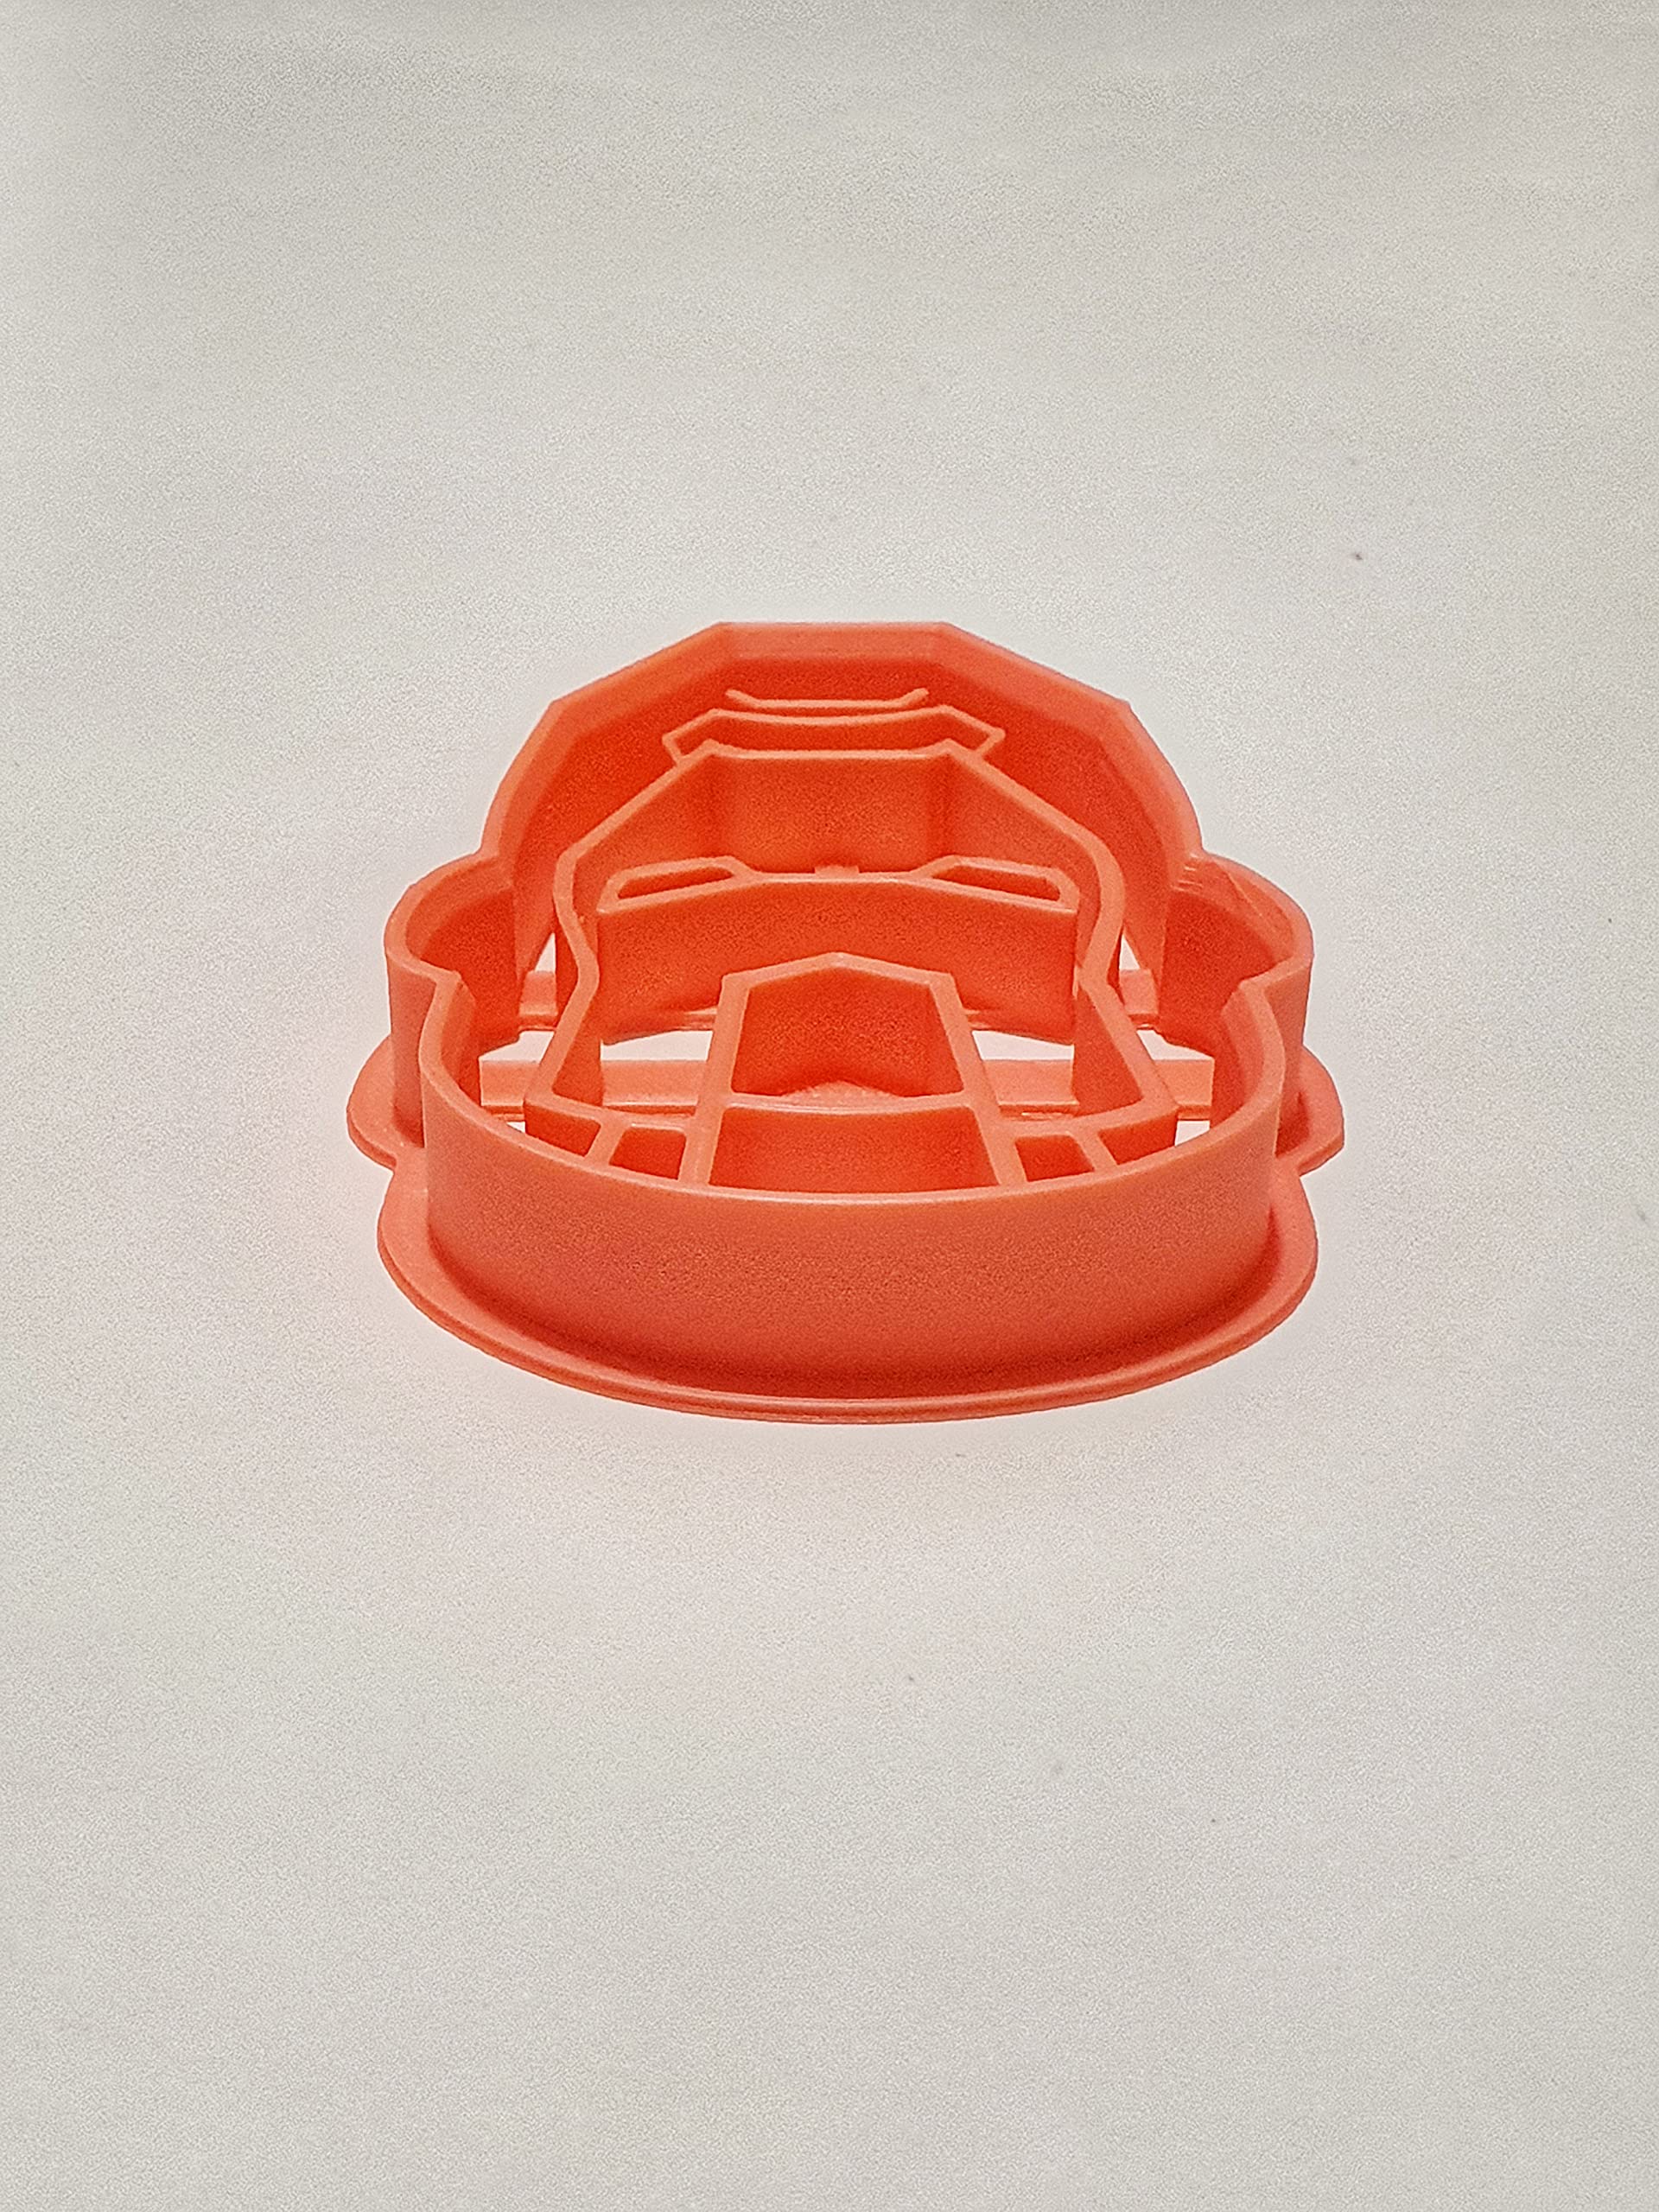 T3D Cookie Cutters Ironman Cookie Cutter, Suitable for Cakes Biscuit and Fondant Cookie Mold for Homemade Treats, 2.61 inch x 3.46 inch x 0.55 inch